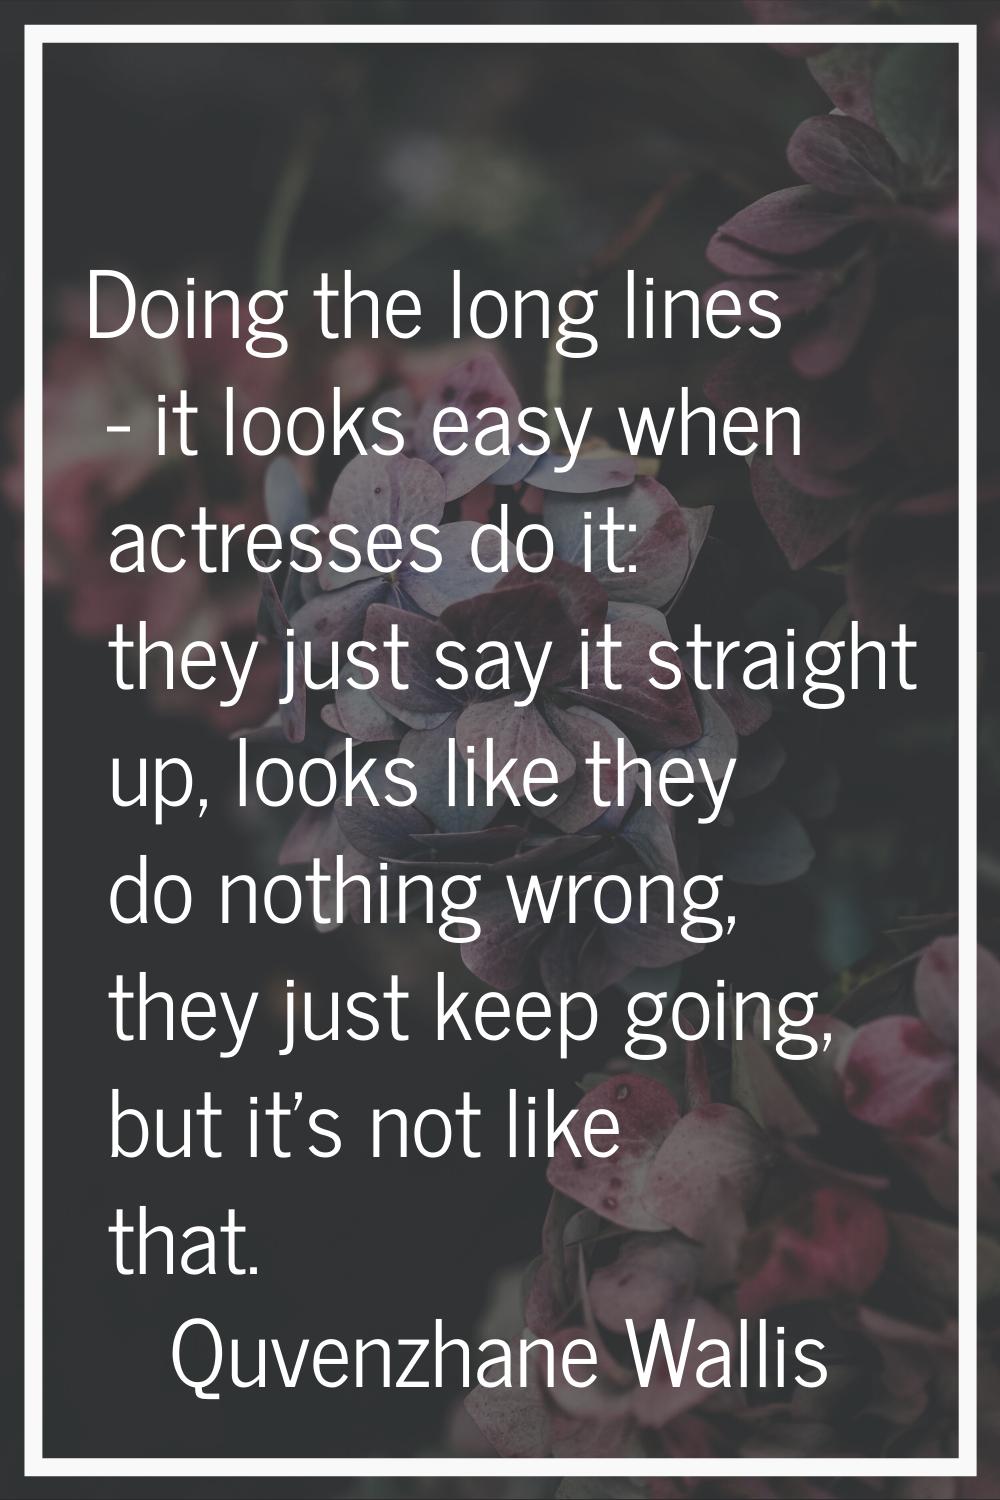 Doing the long lines - it looks easy when actresses do it: they just say it straight up, looks like